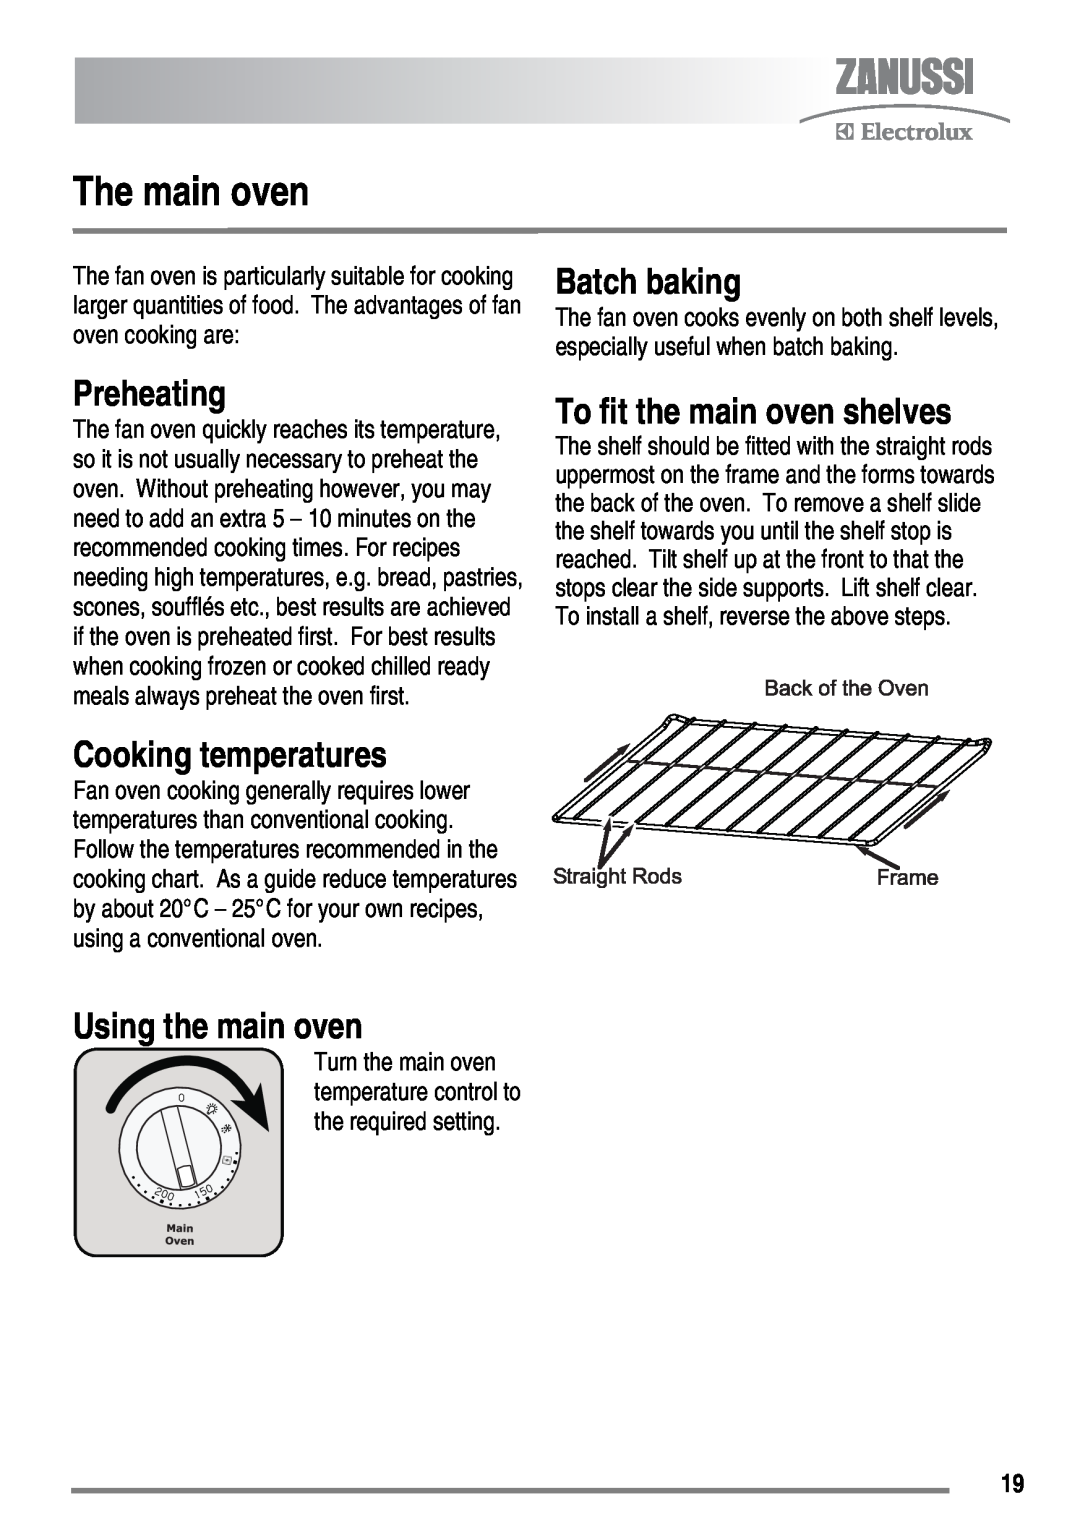 Zanussi ZKC5540 user manual The main oven, Batch baking, Preheating, To fit the main oven shelves, Cooking temperatures 